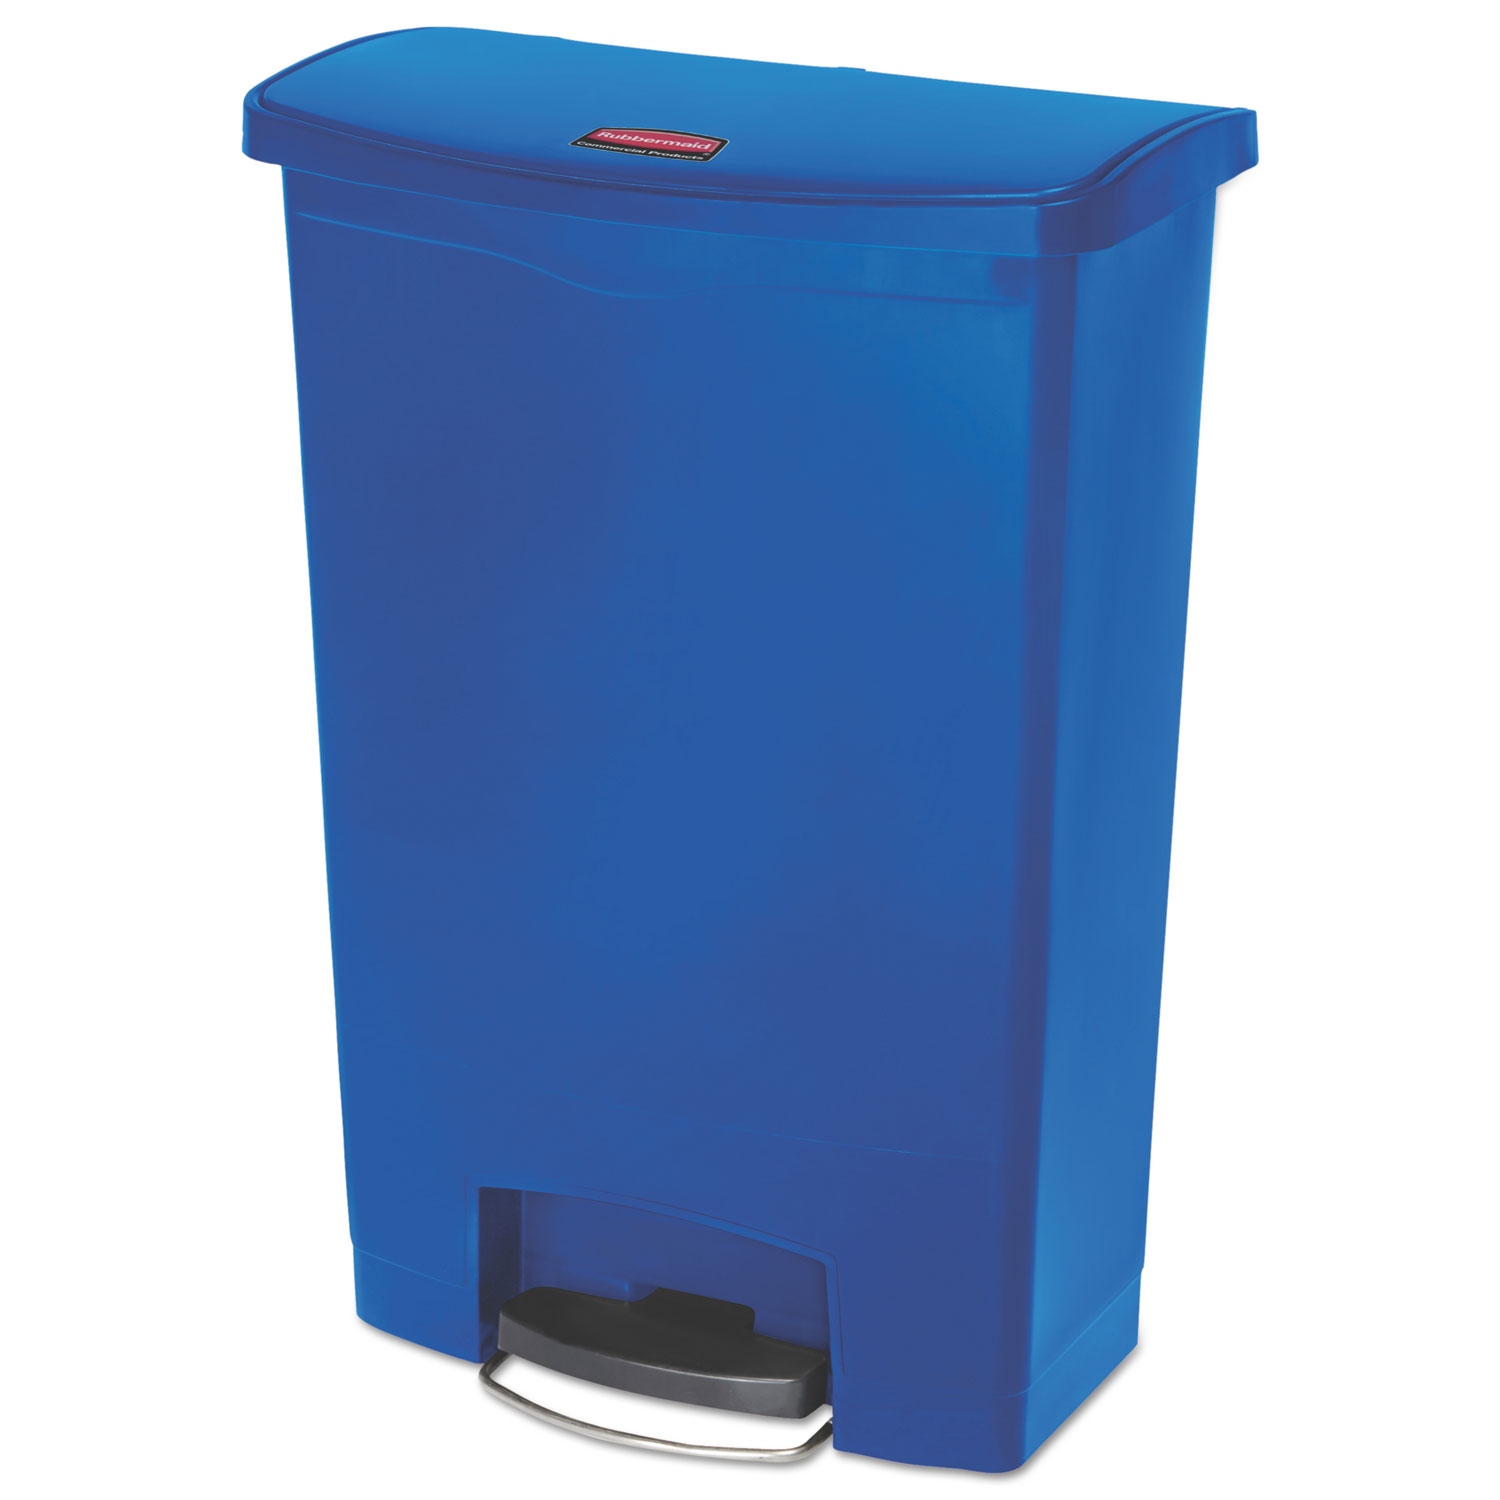  Rubbermaid Commercial 1883597 Slim Jim Resin Step-On Container, Front Step Style, 24 gal, Blue (RCP1883597) 